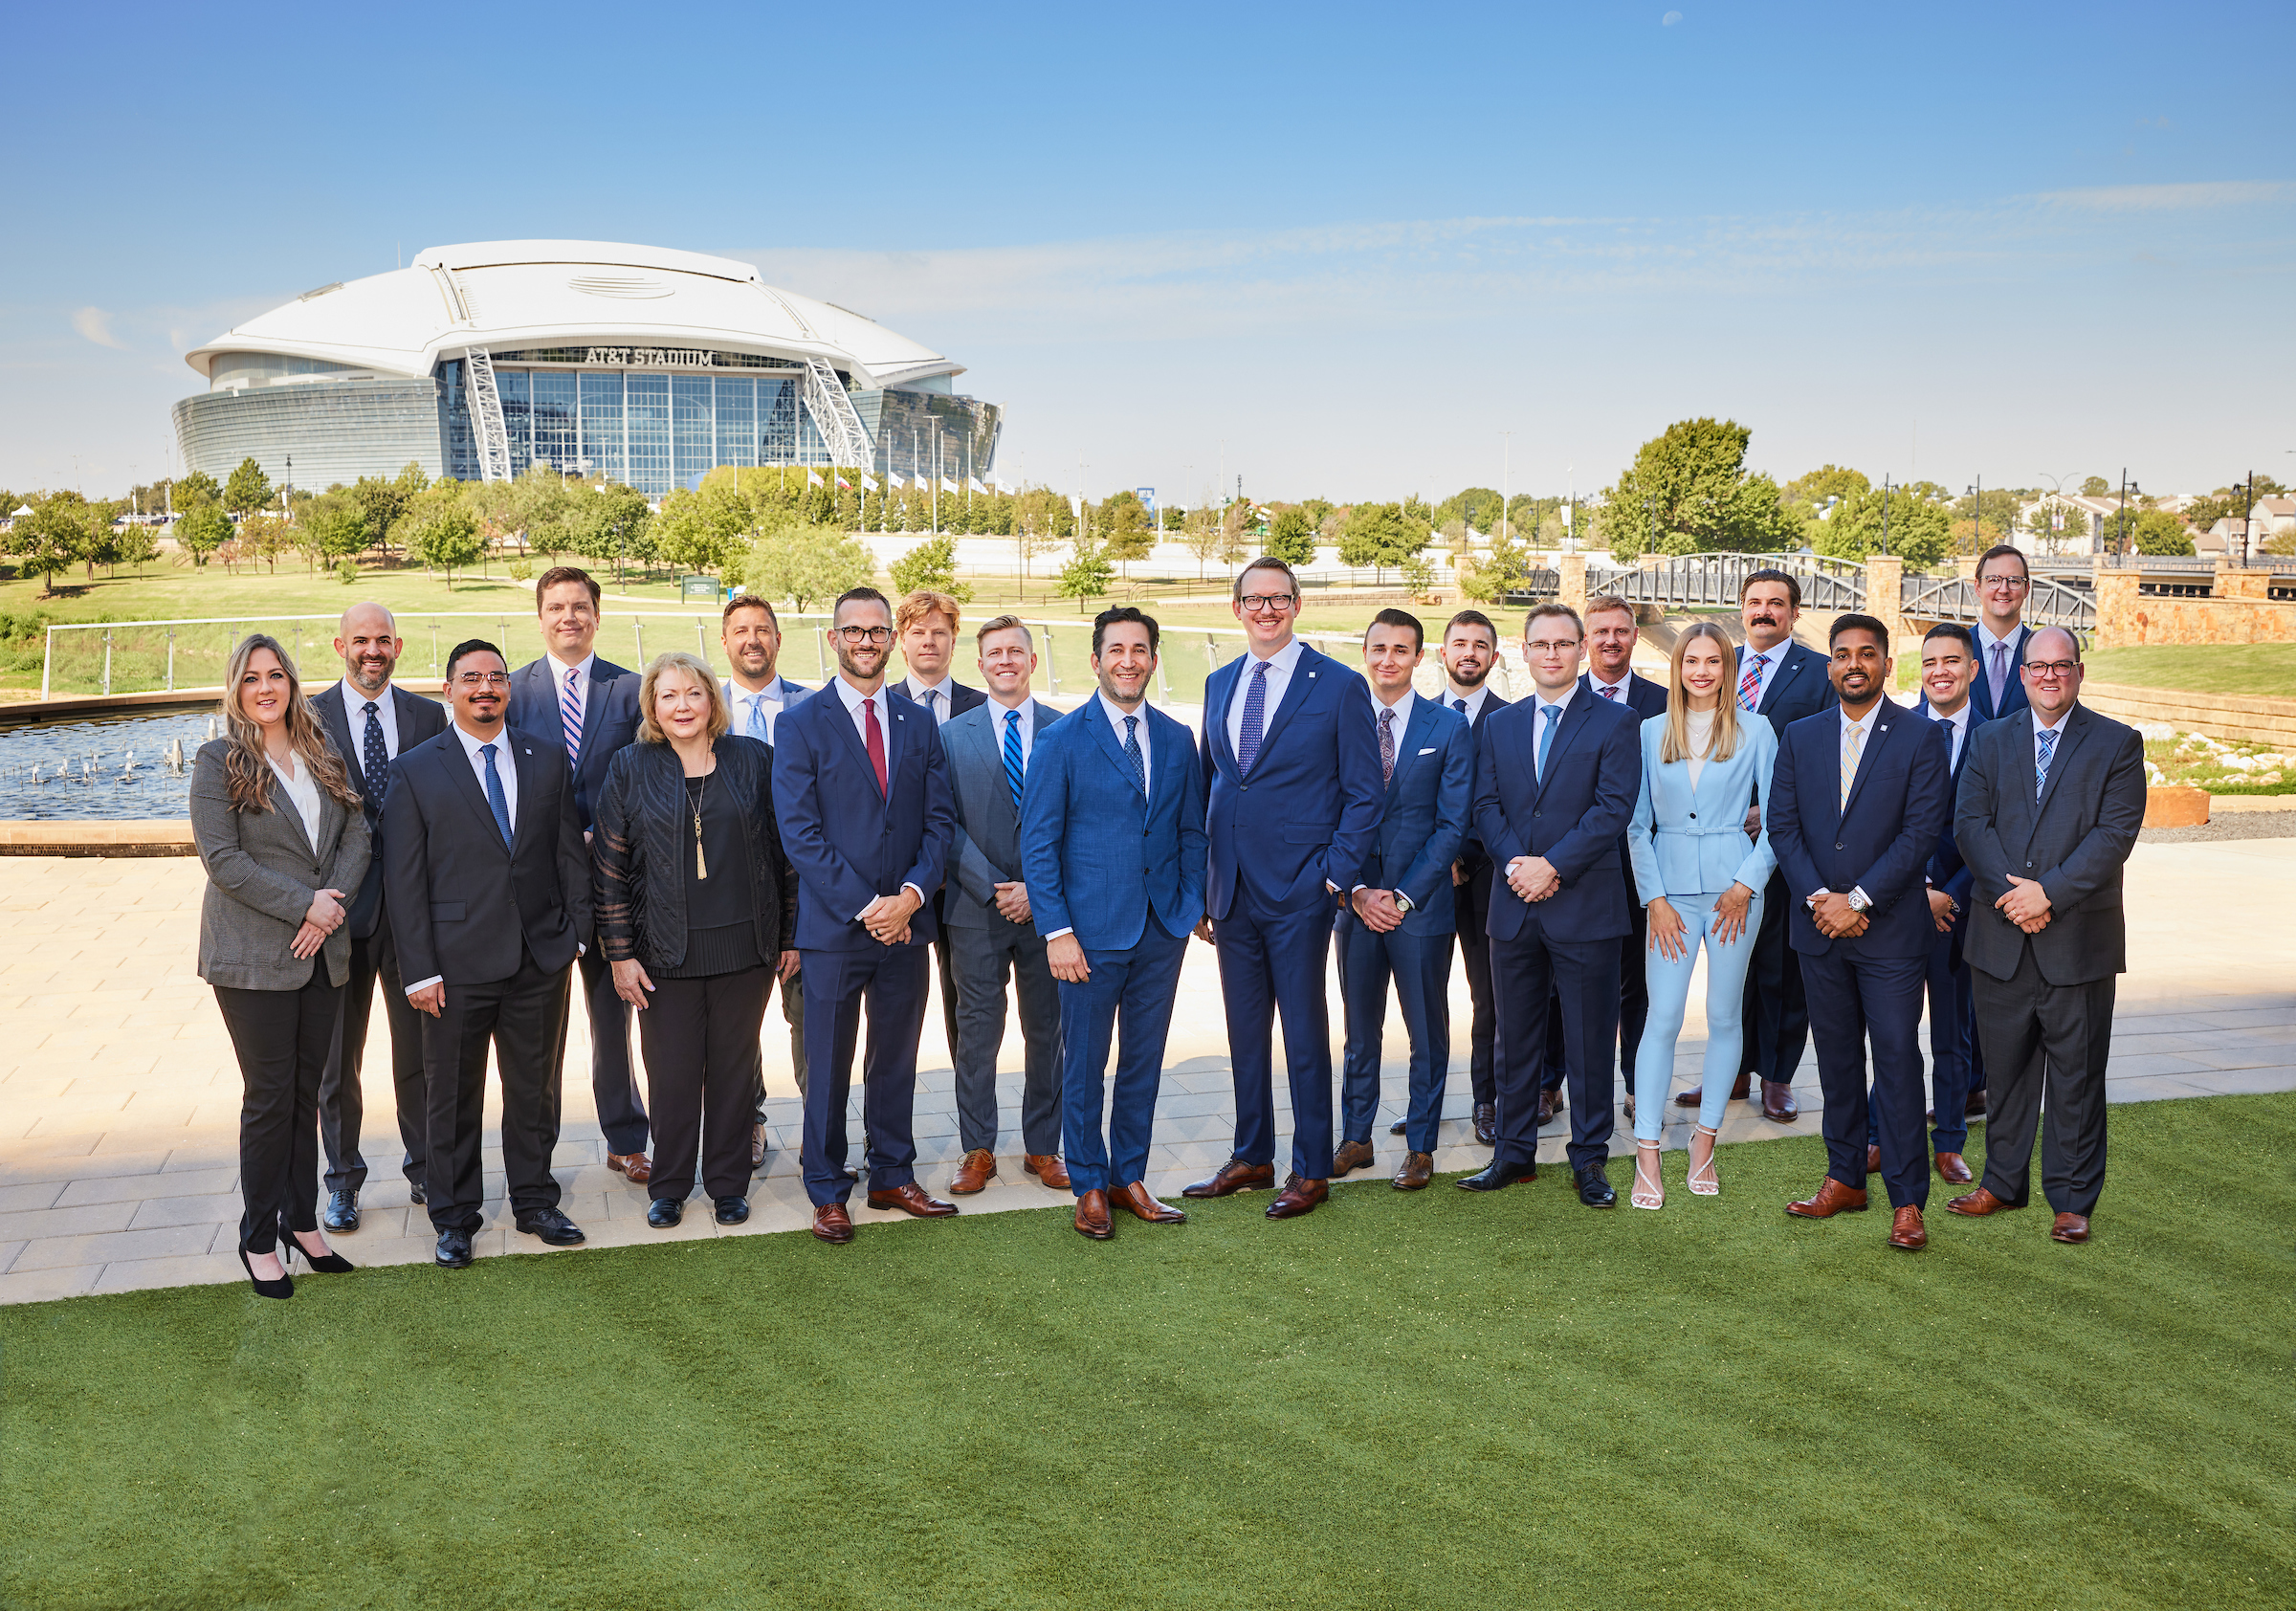 The team photo for The Multifamily Group taken in Arlington with the AT&T Stadium in the background.